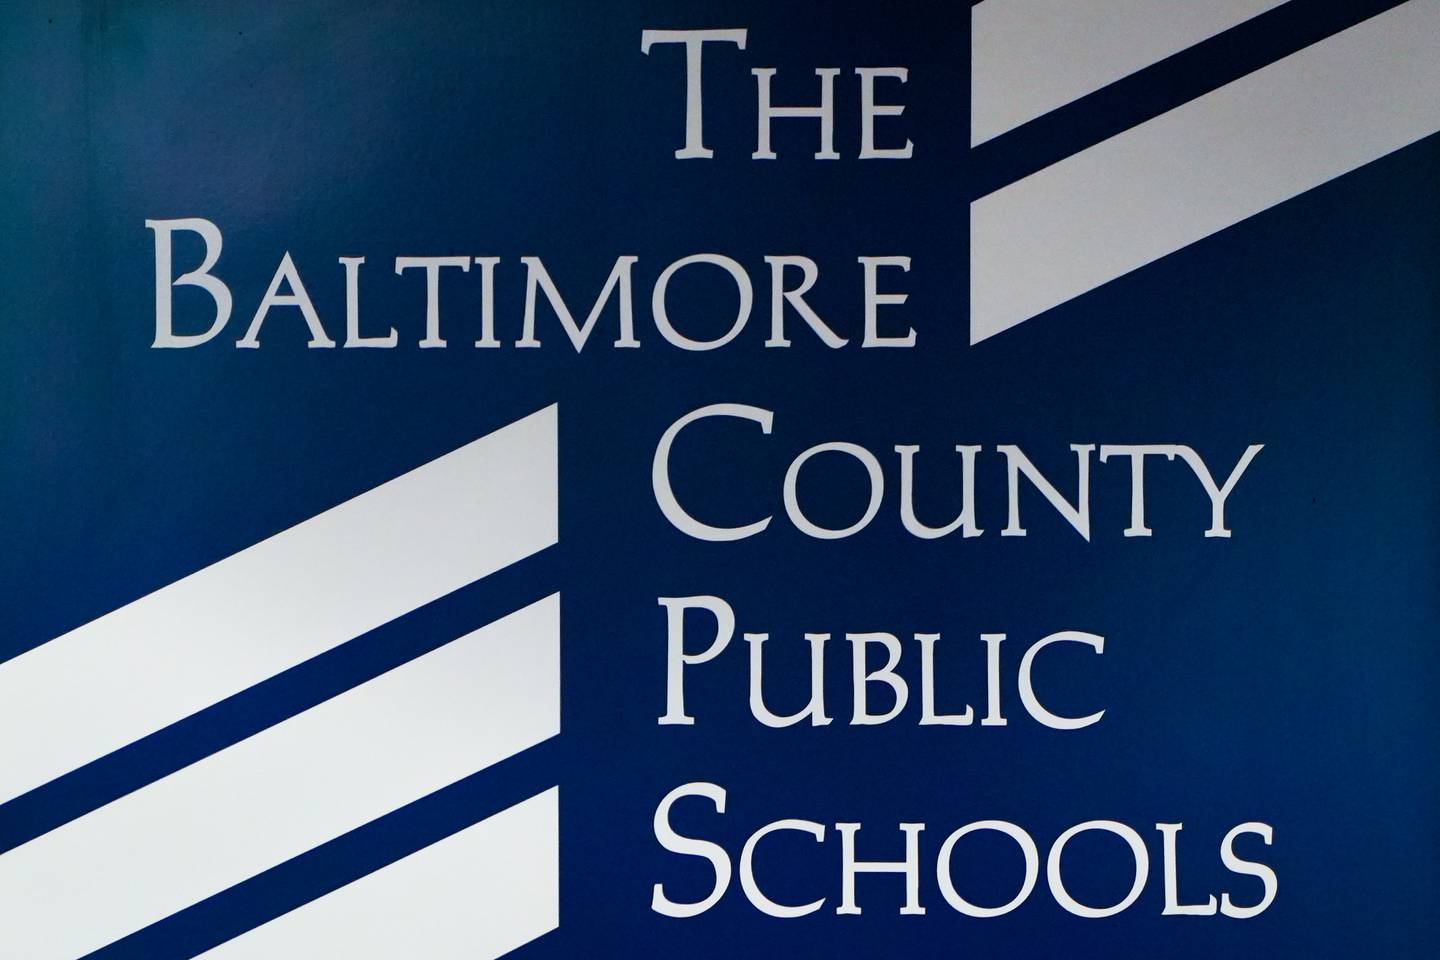 The Baltimore County Board of Education’s logo as seen the wall during their bi-weekly meeting at the Greenwood Campus on 8/23/22.